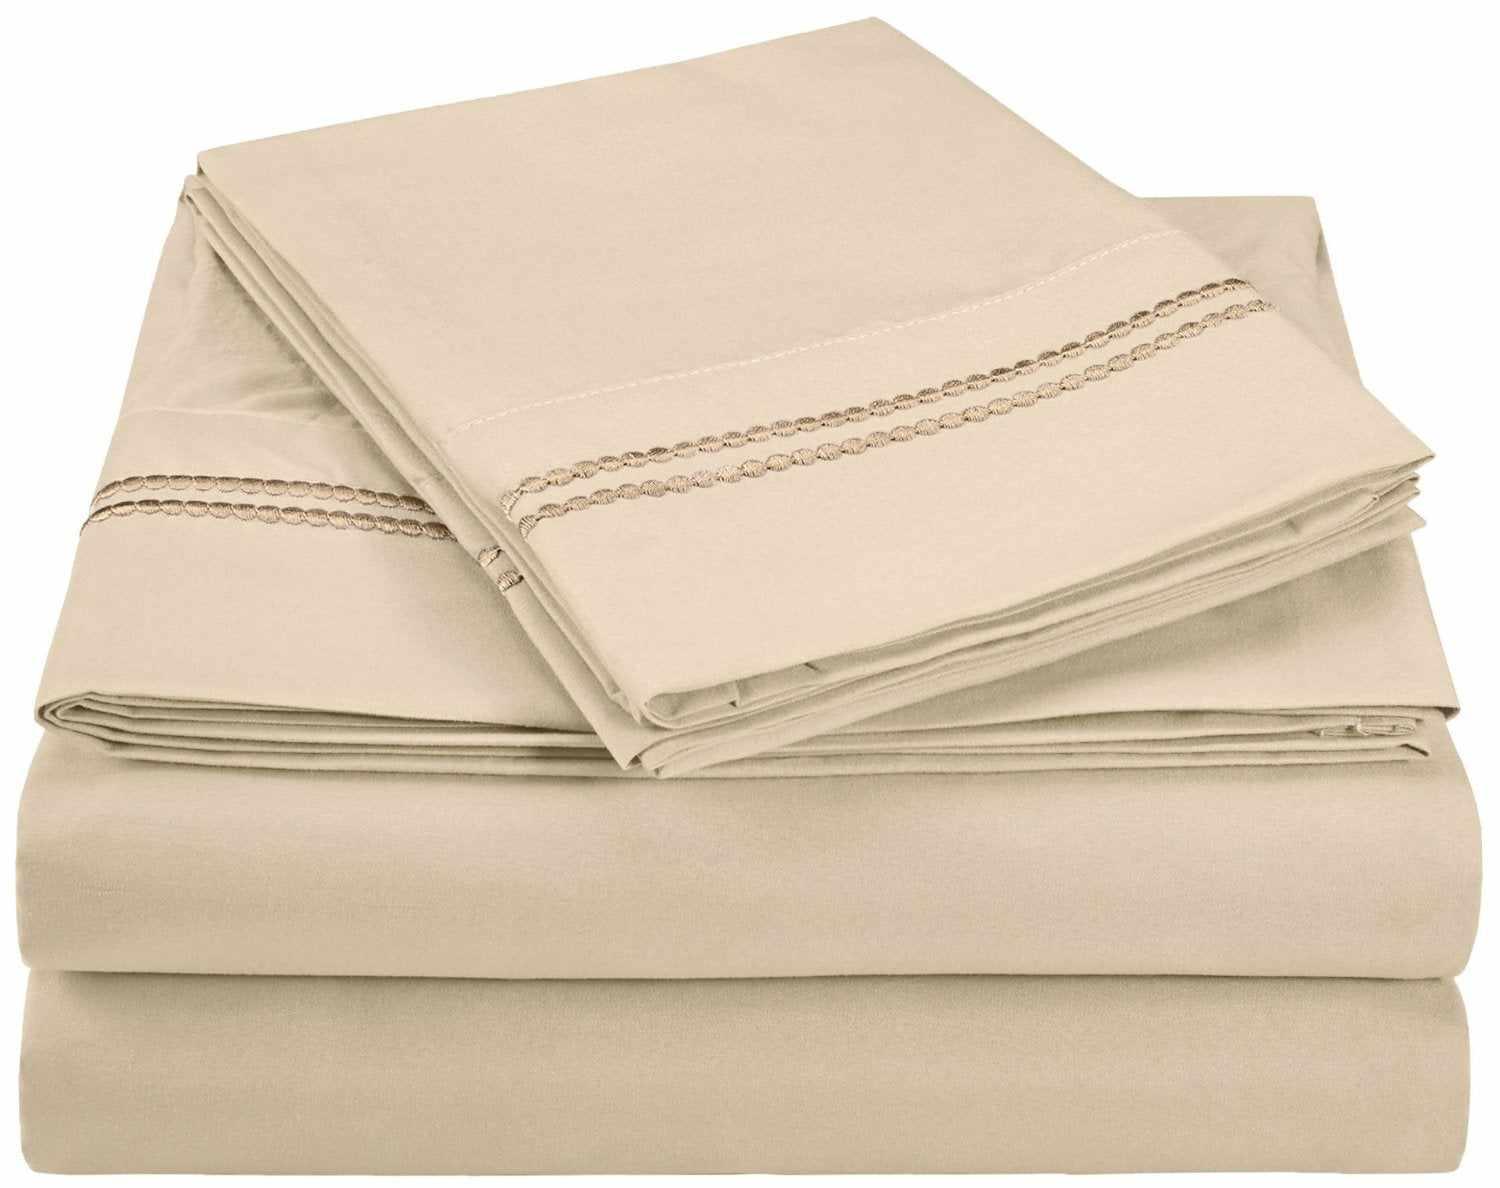 Superior 3000 Series Wrinkle Resistant 2 Line Embroidery Sheet Set - Ivory